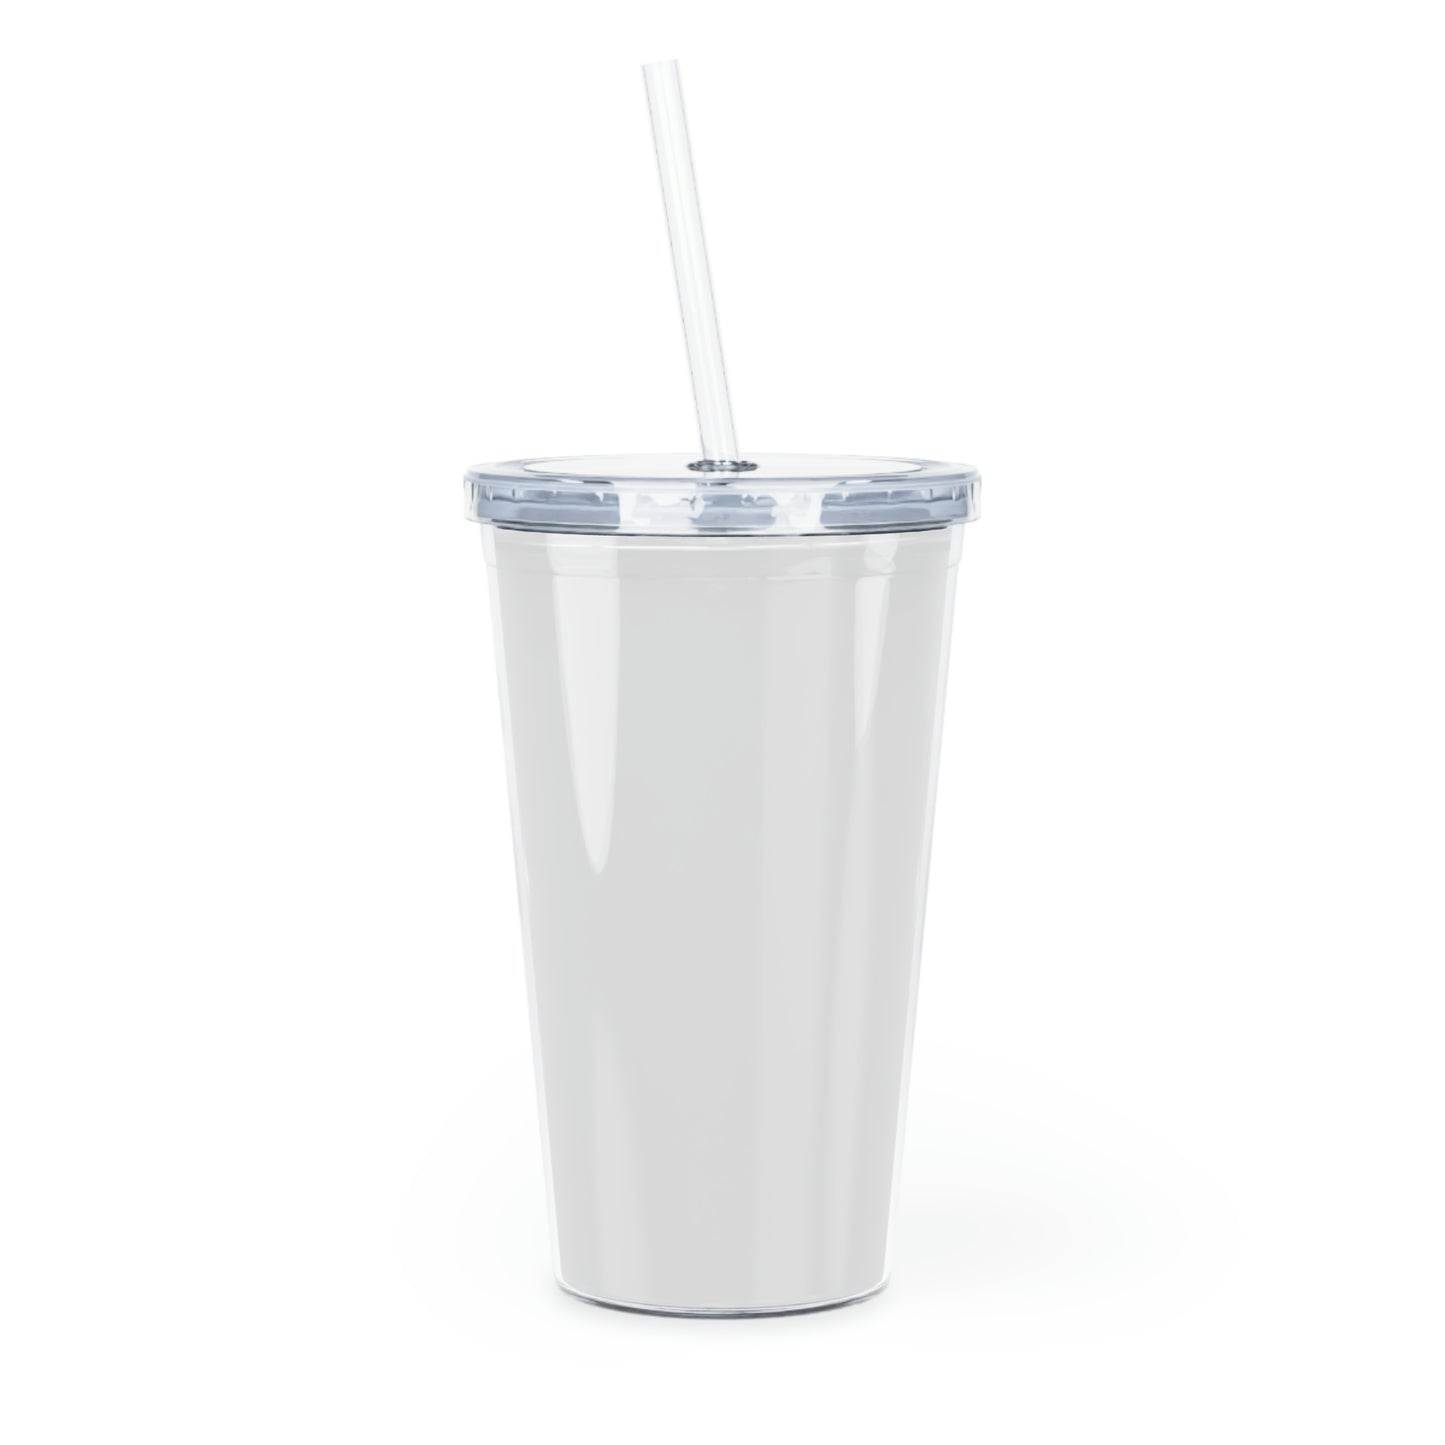 Live/Love/Travel Plastic Tumbler with Straw